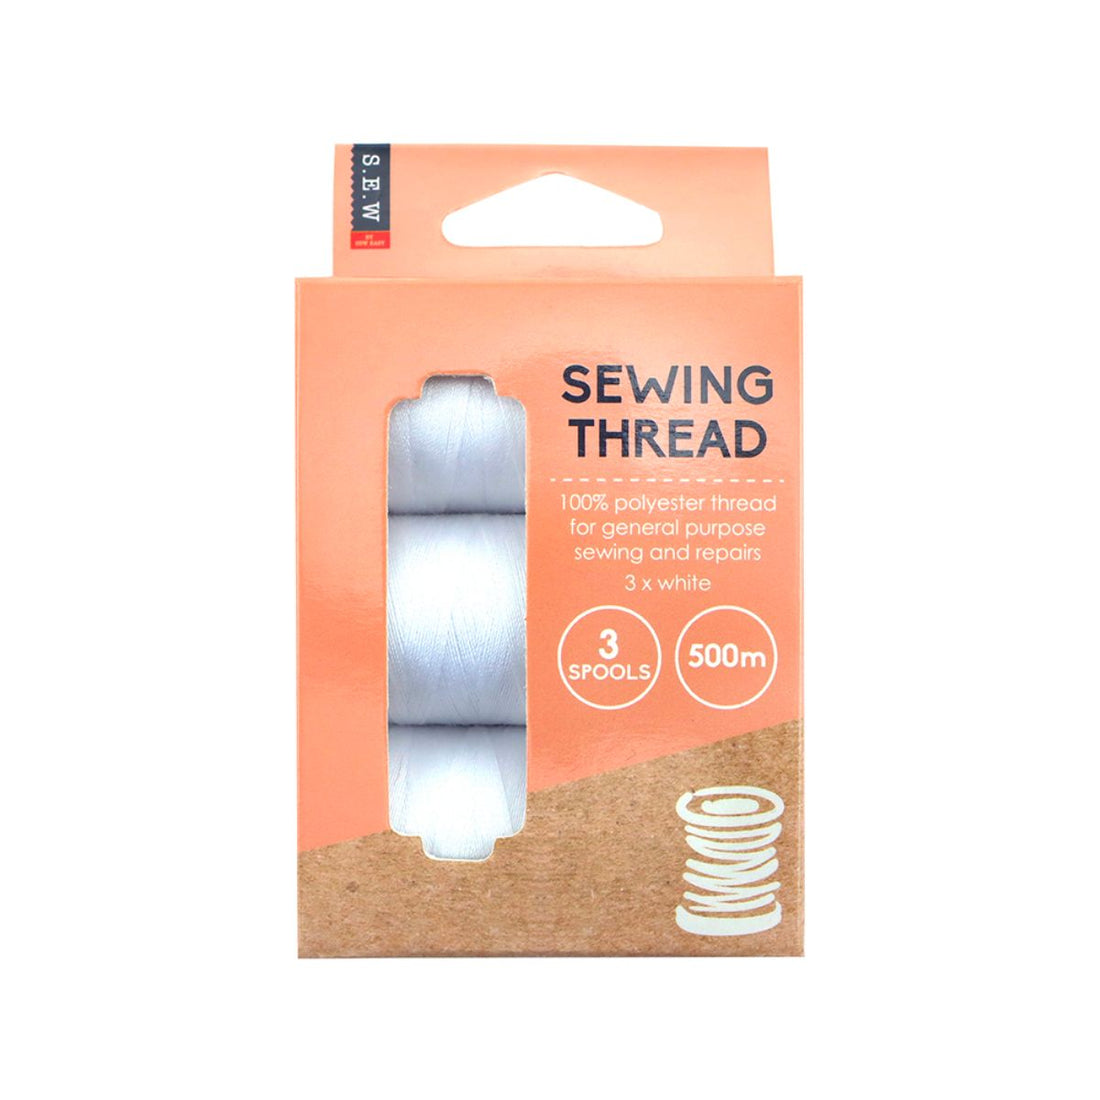 sewing thread pack of three, white 